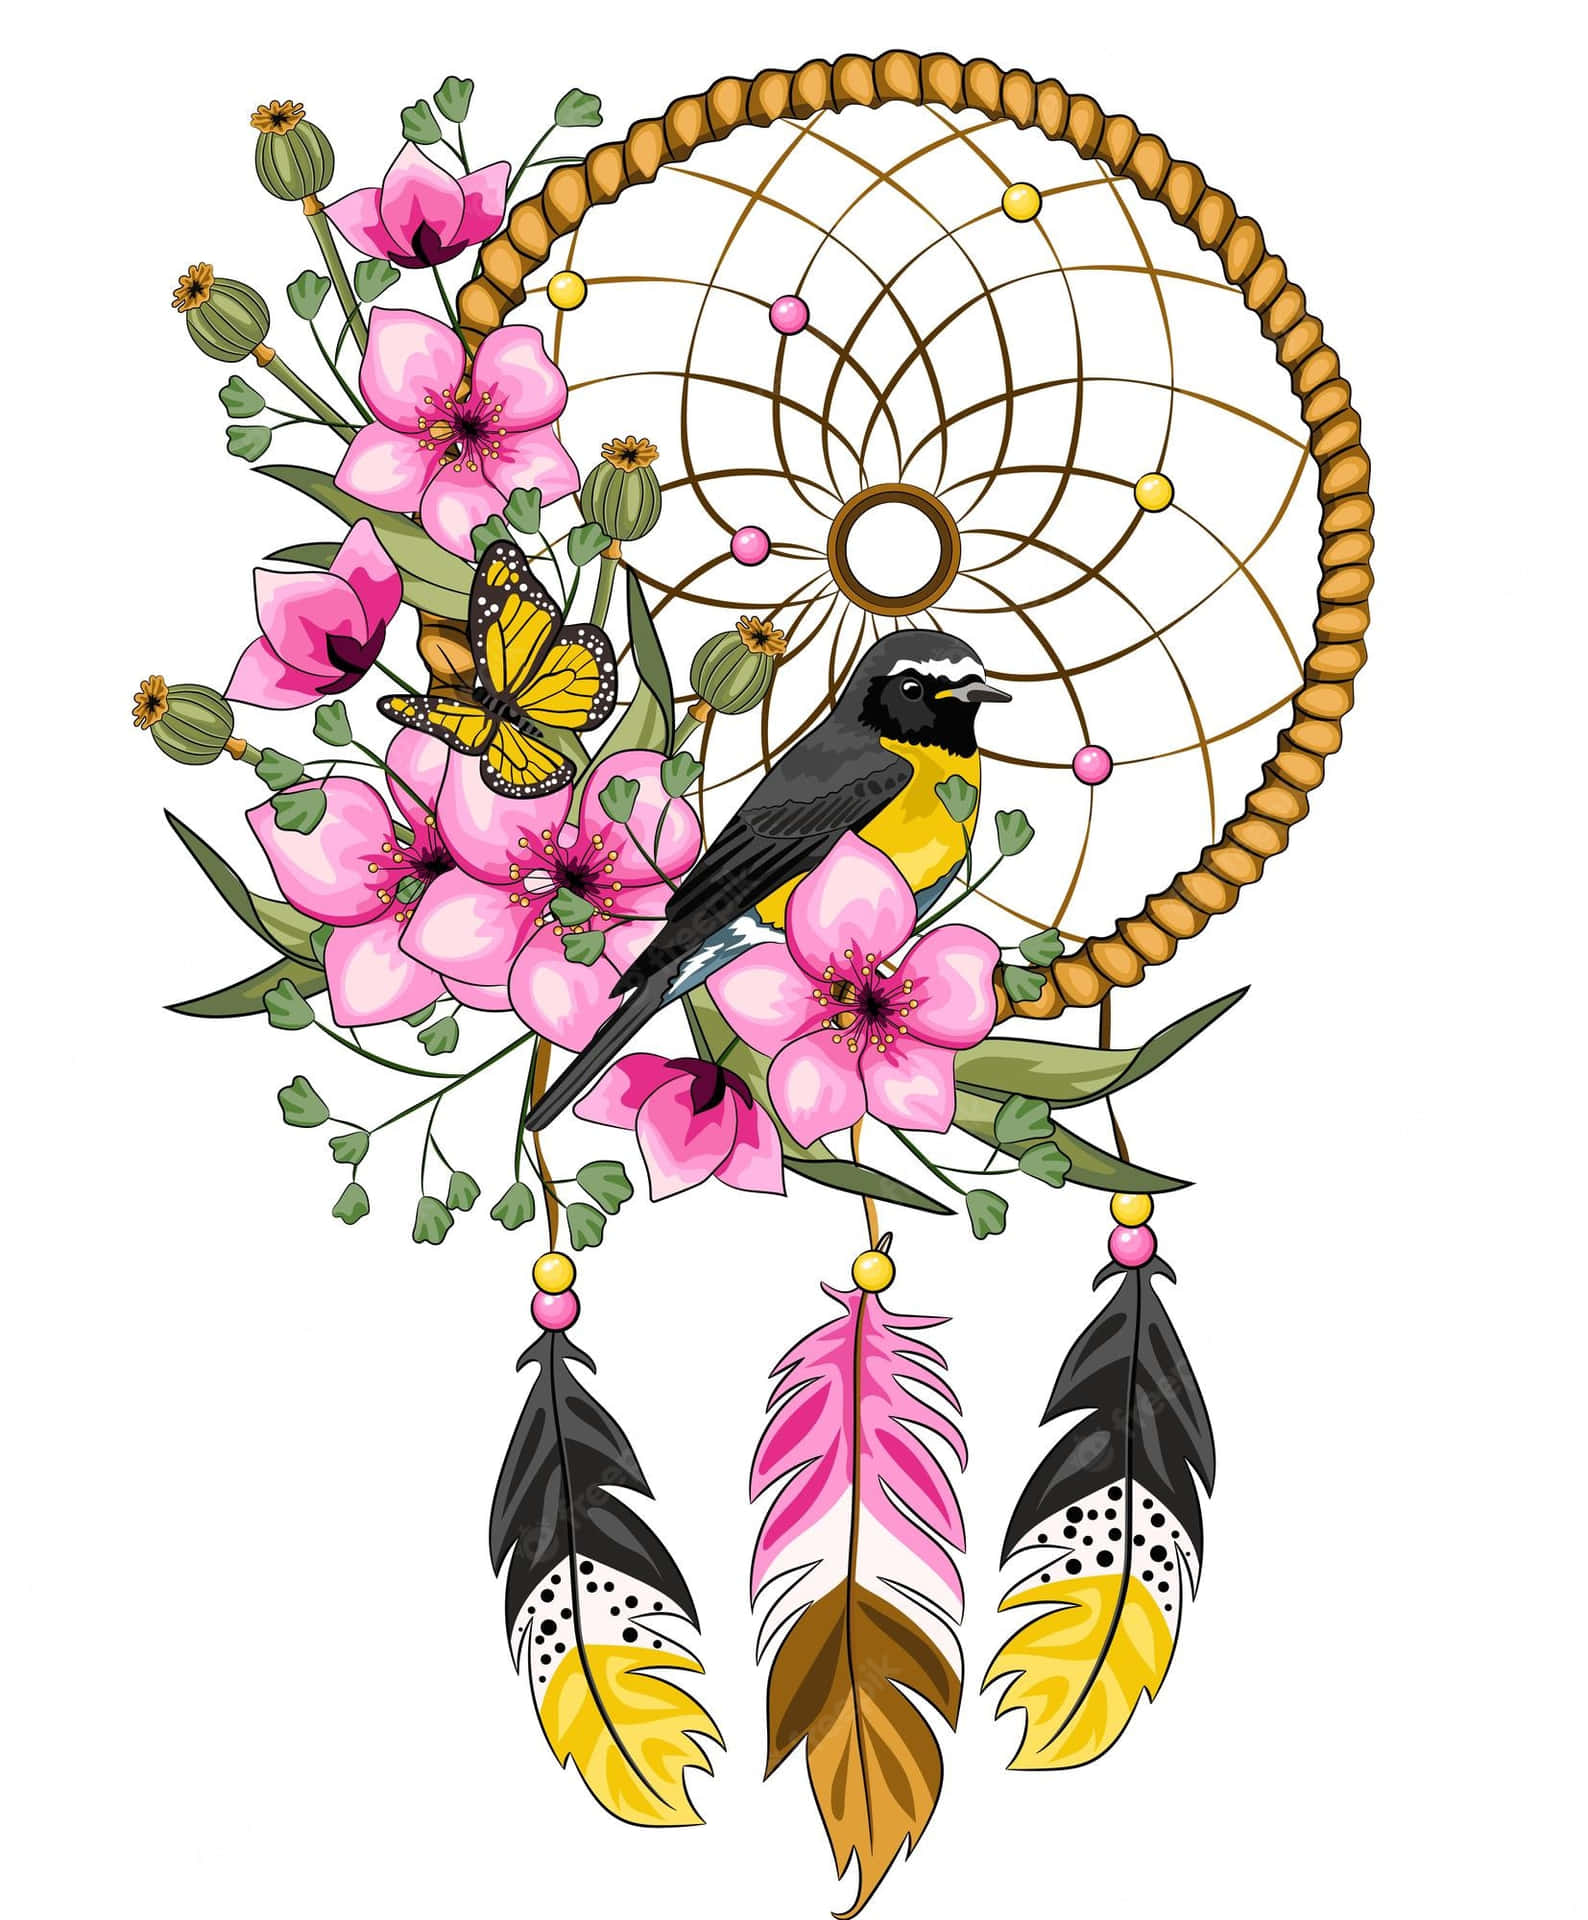 A Dream Catcher With A Bird And Flowers